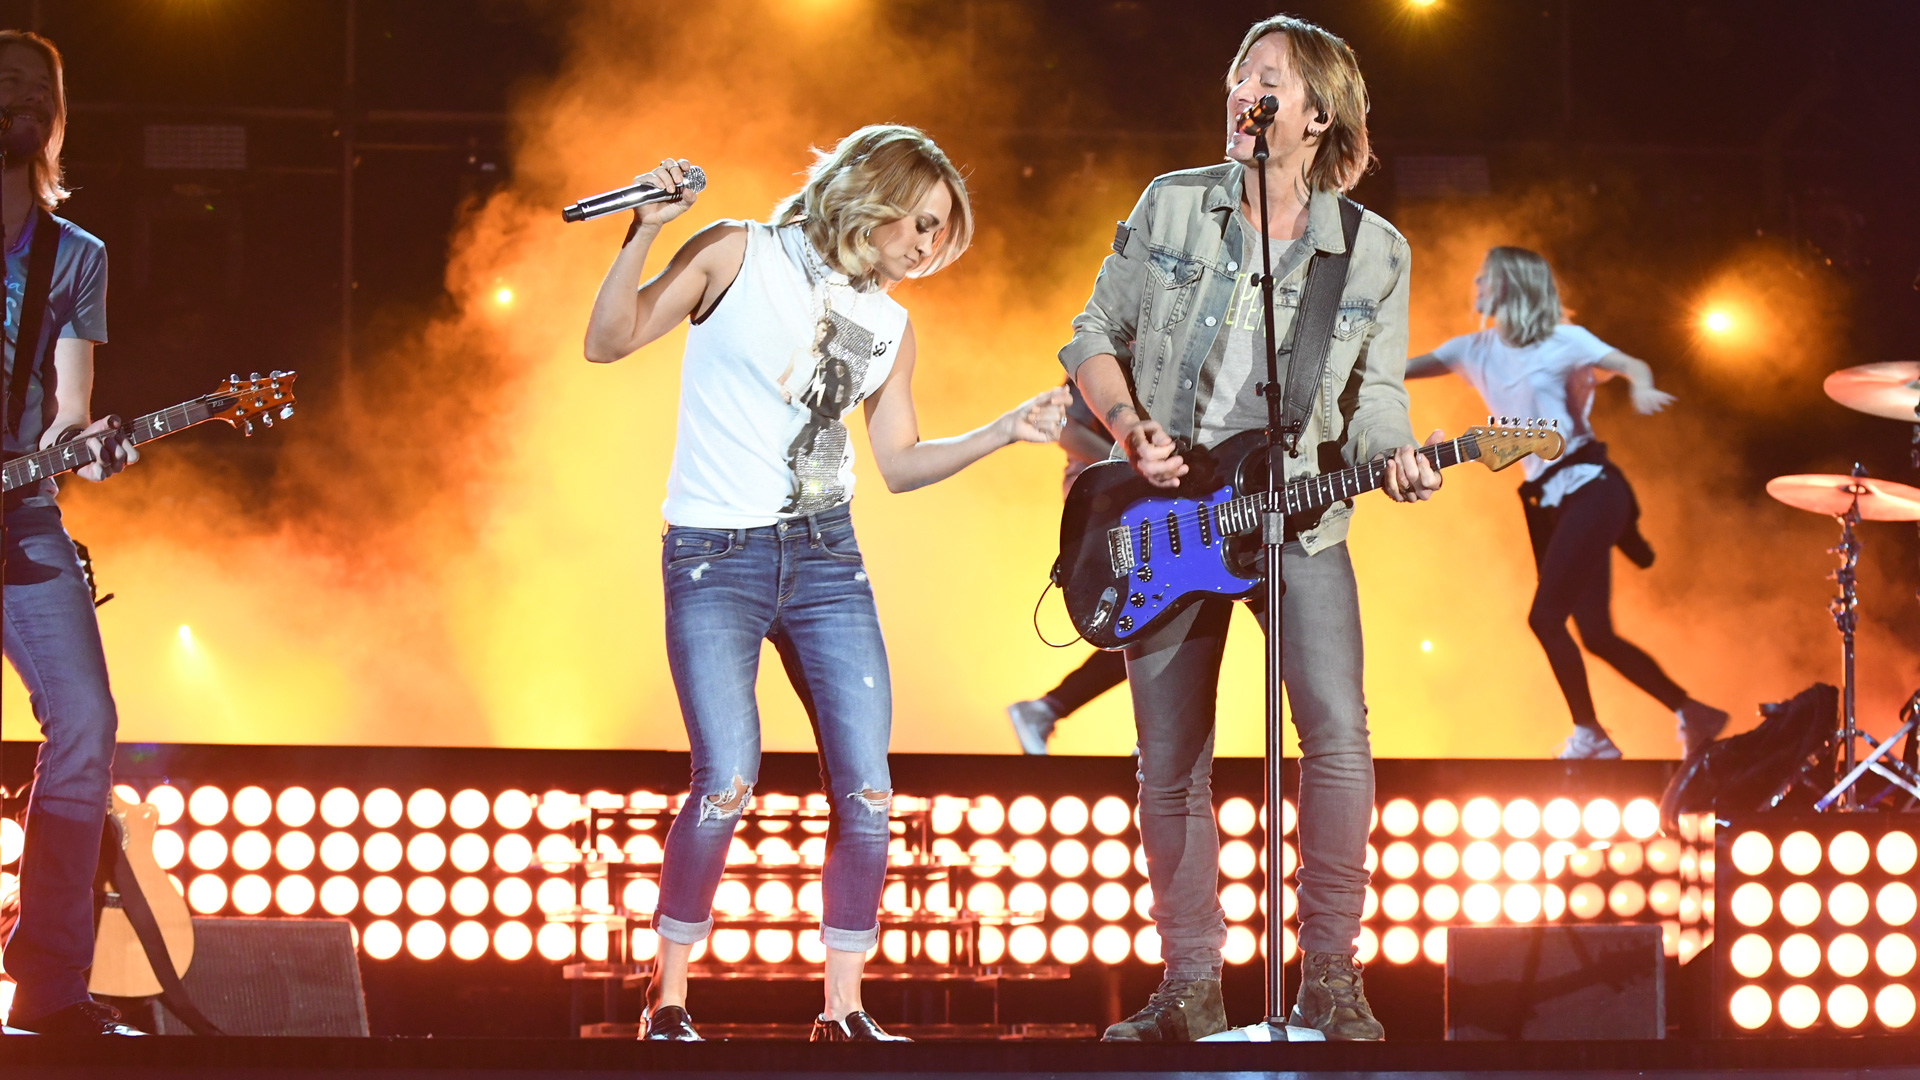 Carrie Underwood and Keith Urban light up center stage with lots of style.